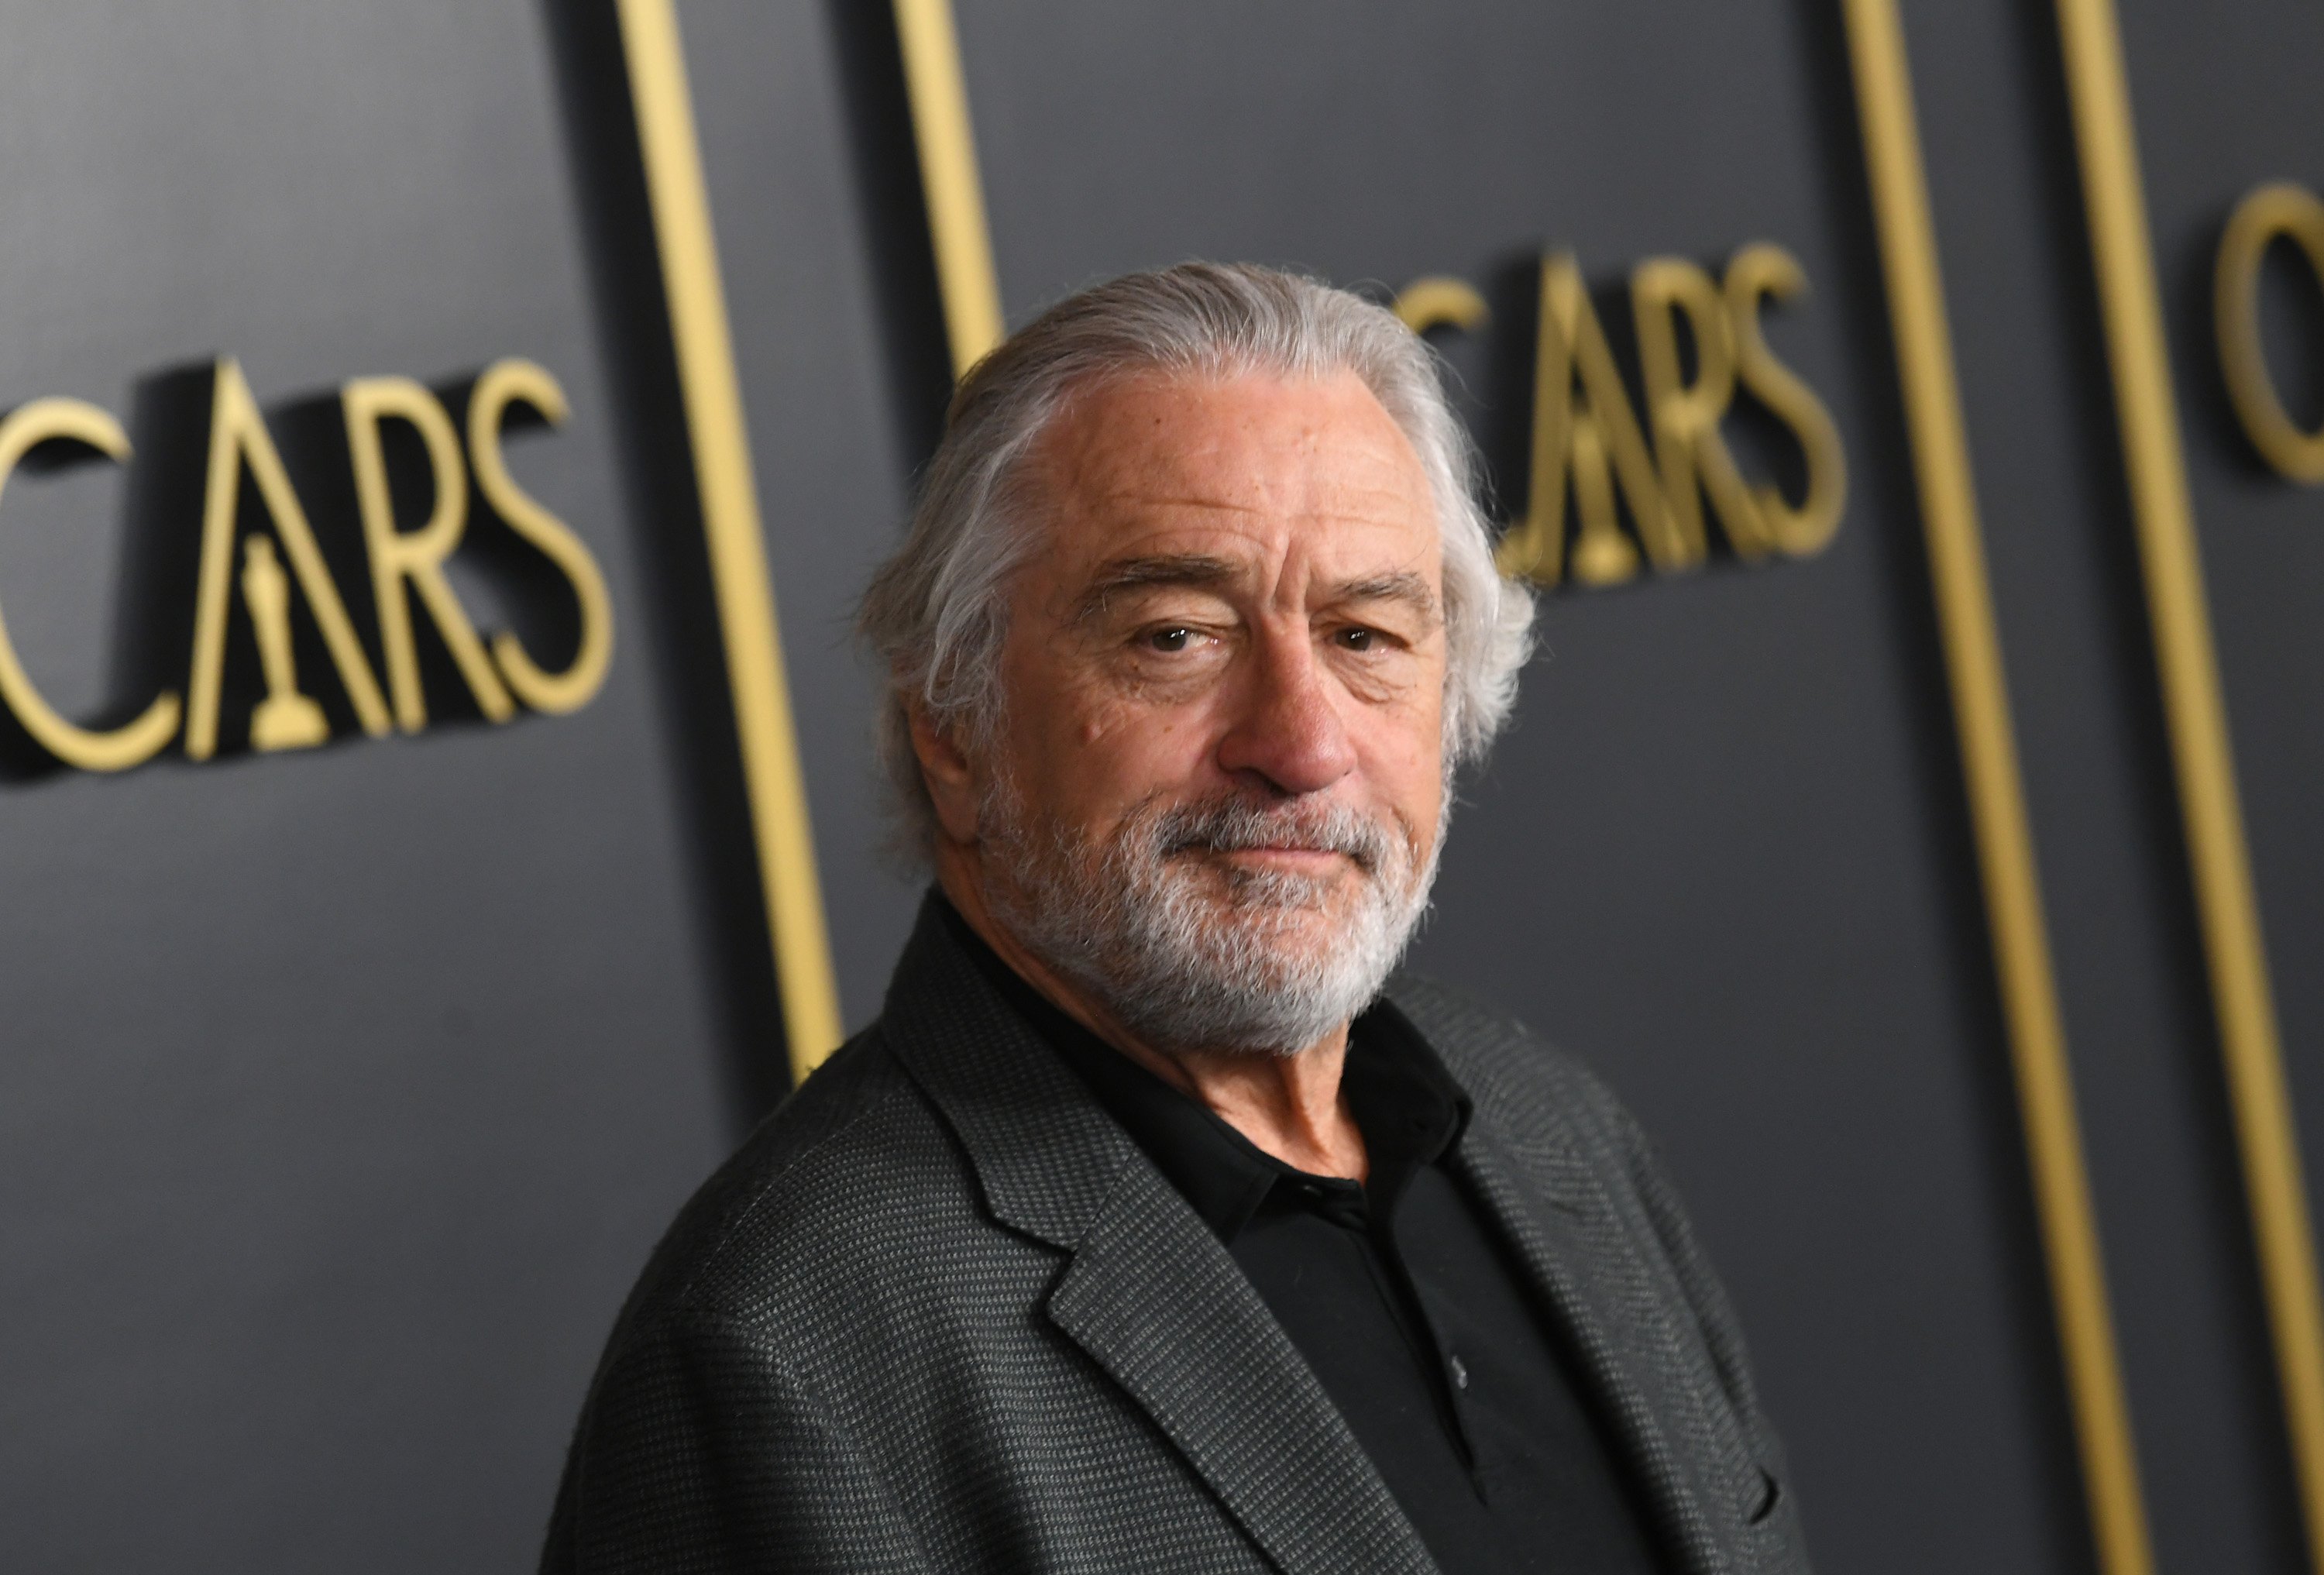 Robert De Niro during the 92nd Oscars Nominees Luncheon on January 27, 2020 in Hollywood, California. | Source: Getty Images